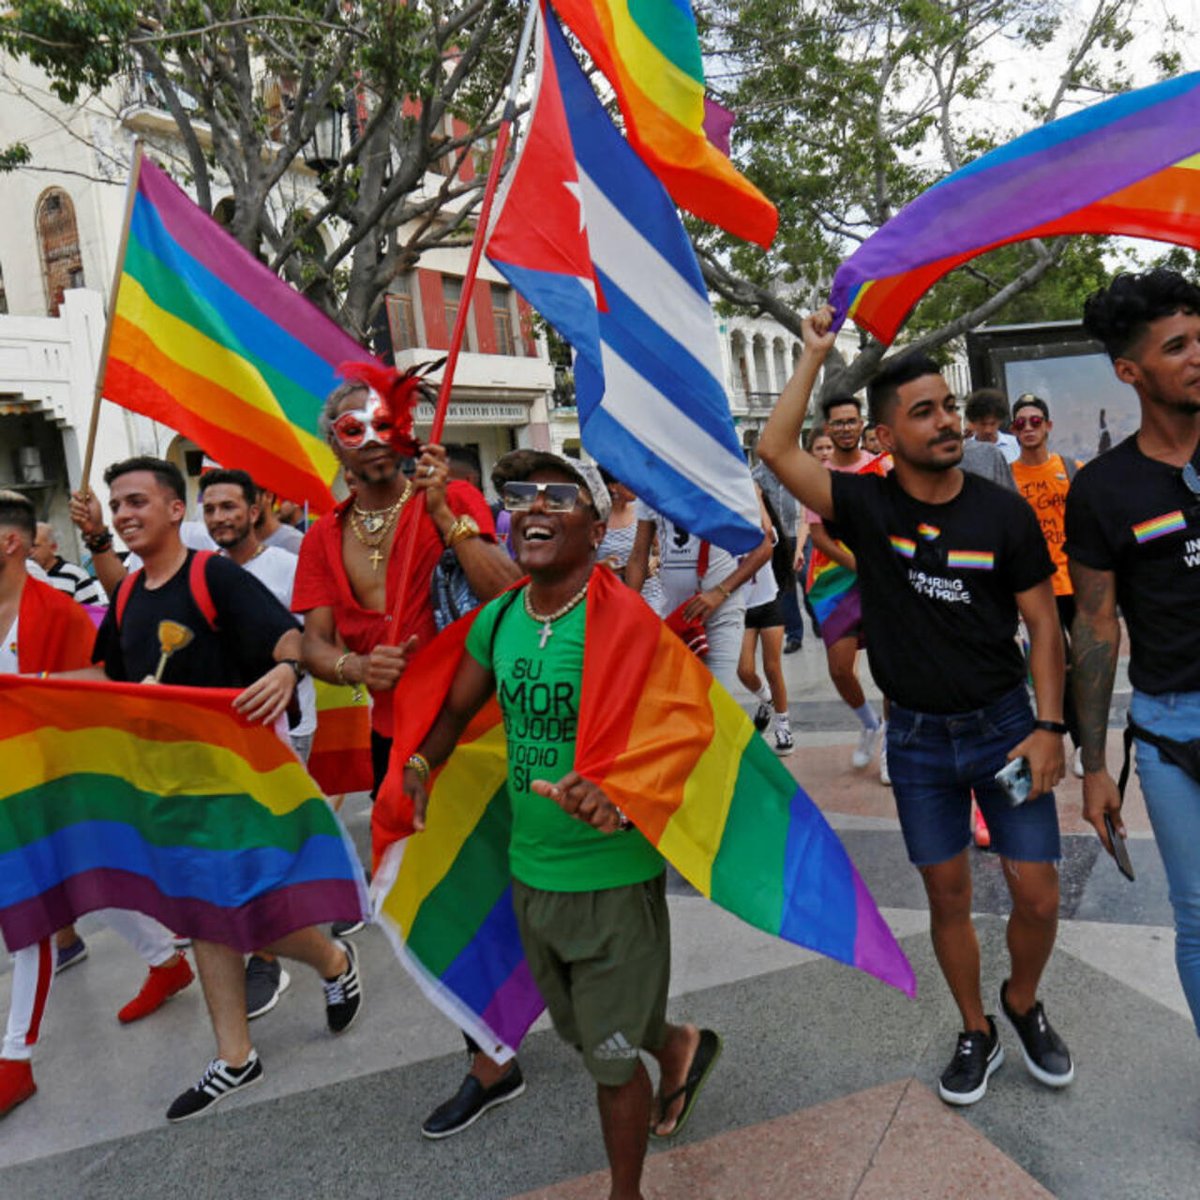 The 100-page code, written in consultation with the general public, has been described by experts as the most inclusive, progressive, and revolutionary code in the world.
bit.ly/3ftWYEs #lgbtcommunity #cuba #familycode #MustRead